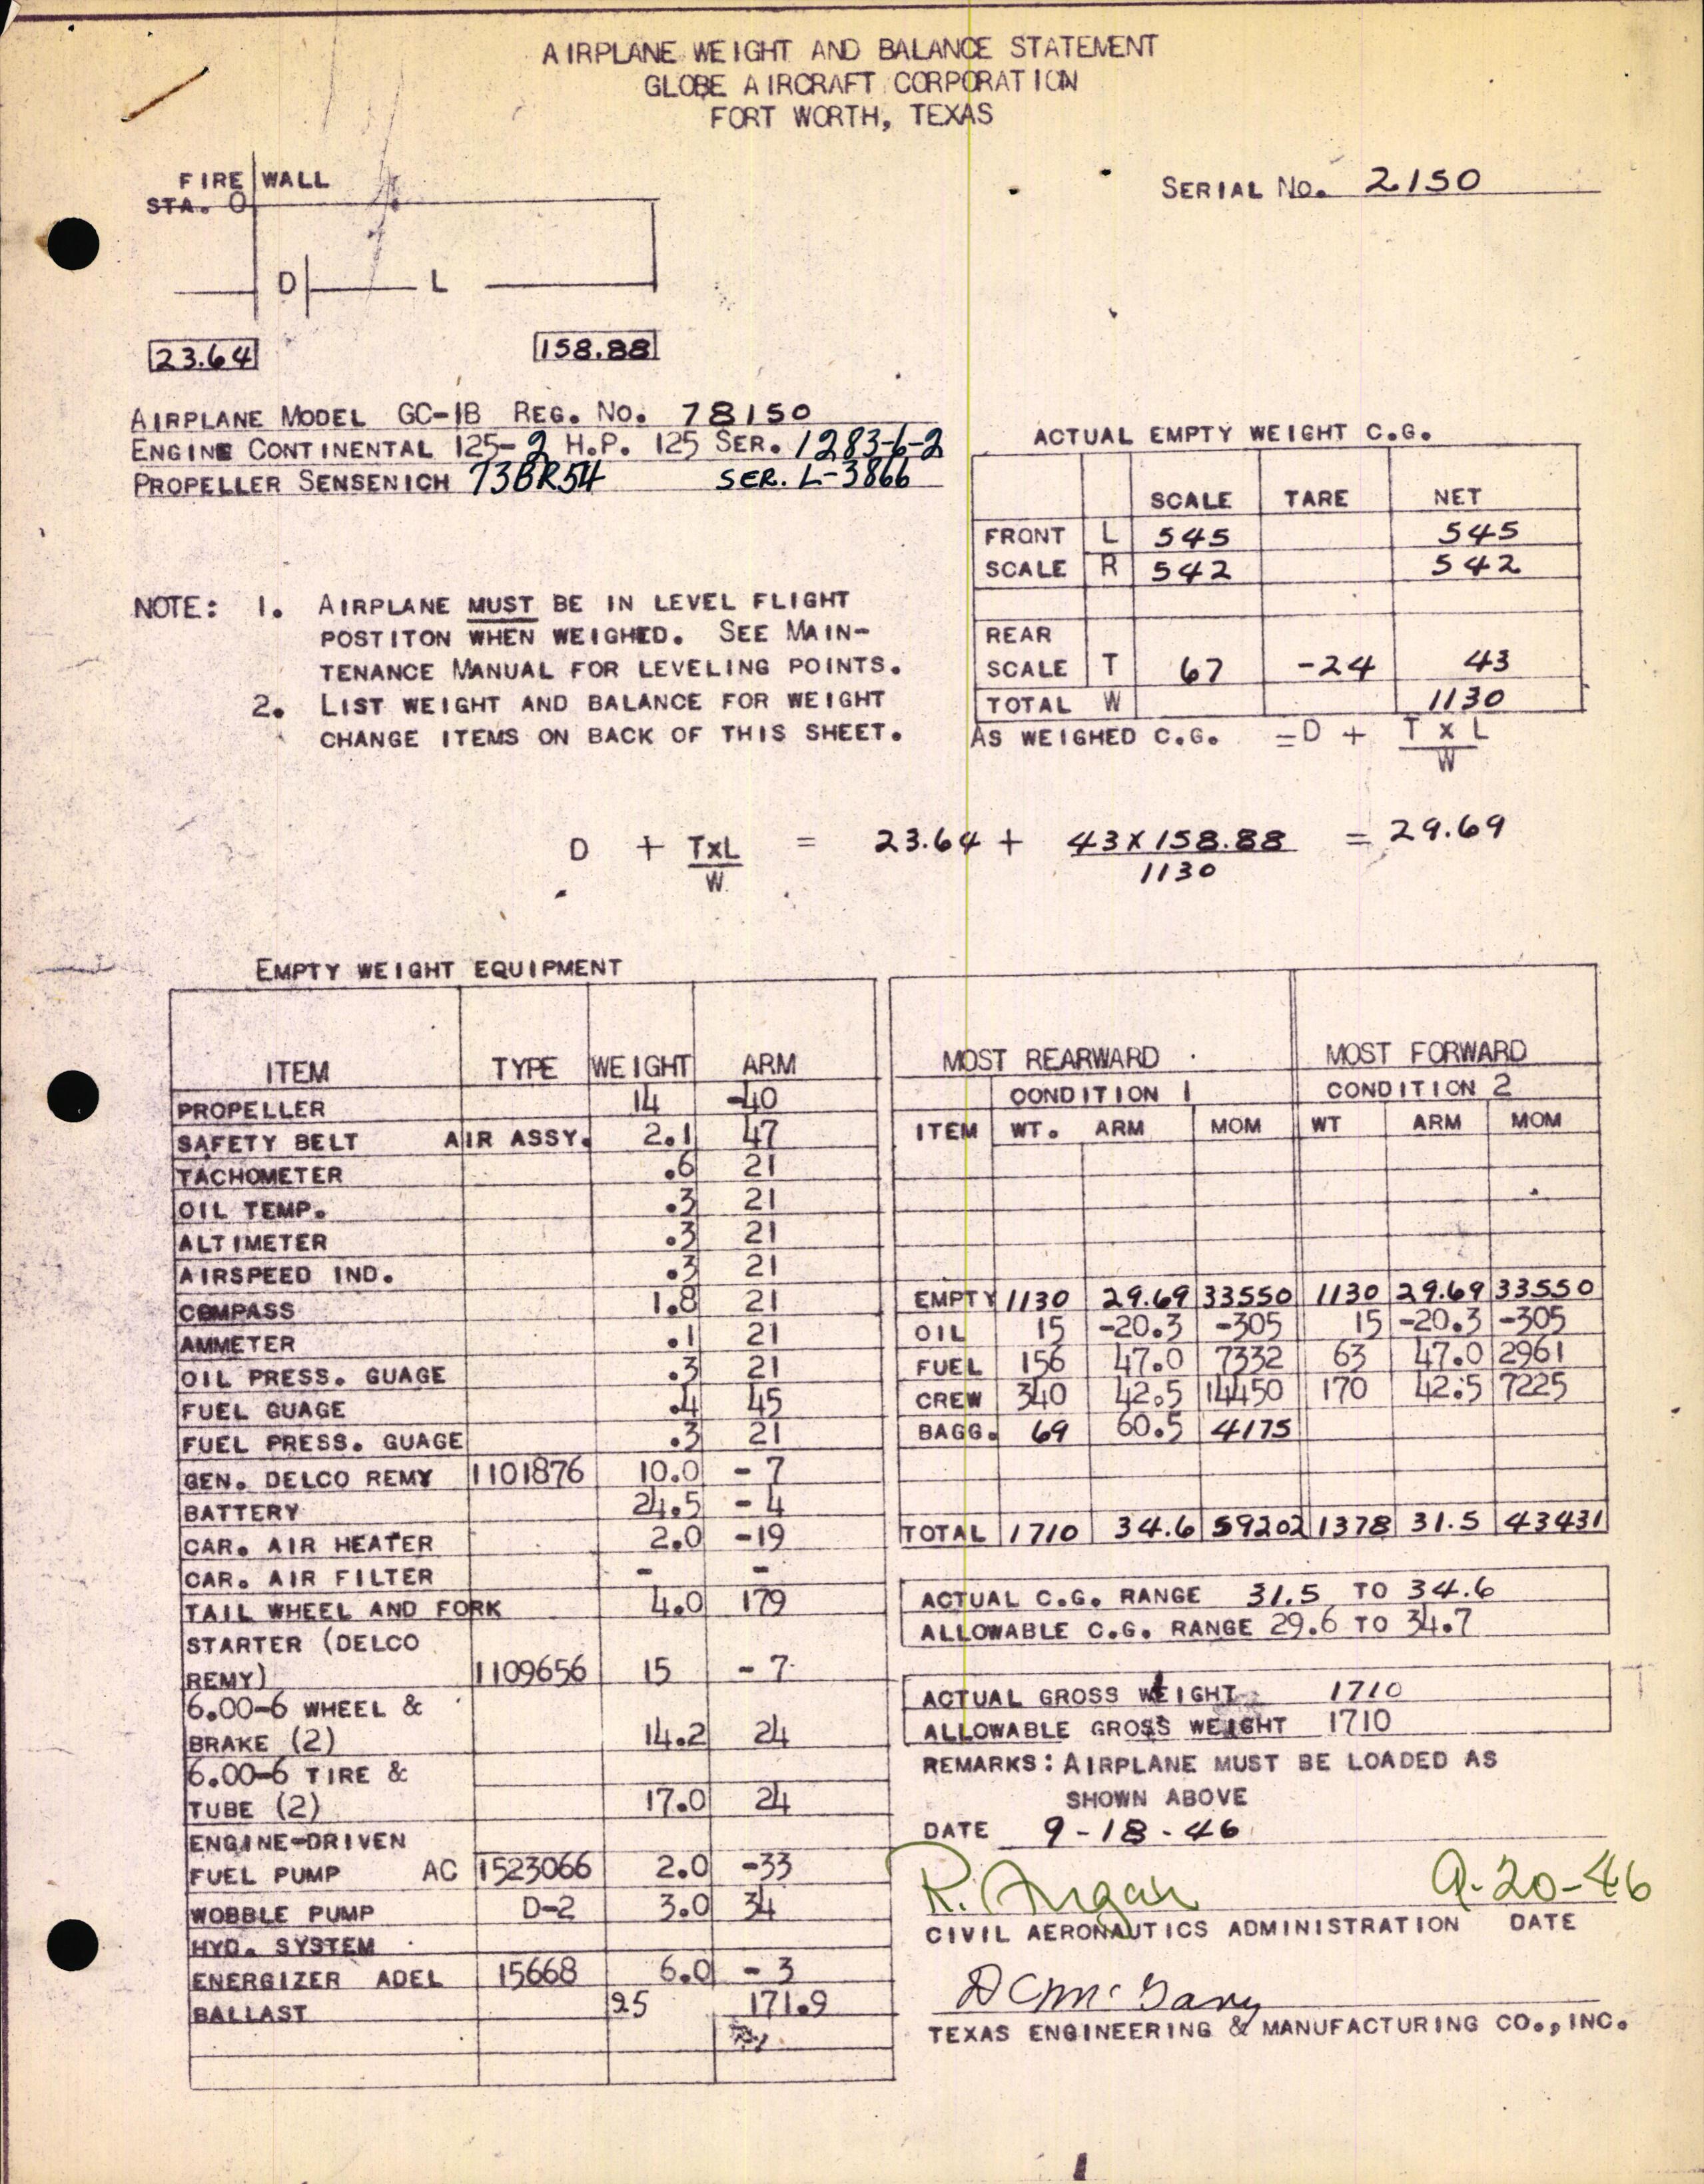 Sample page 3 from AirCorps Library document: Technical Information for Serial Number 2150